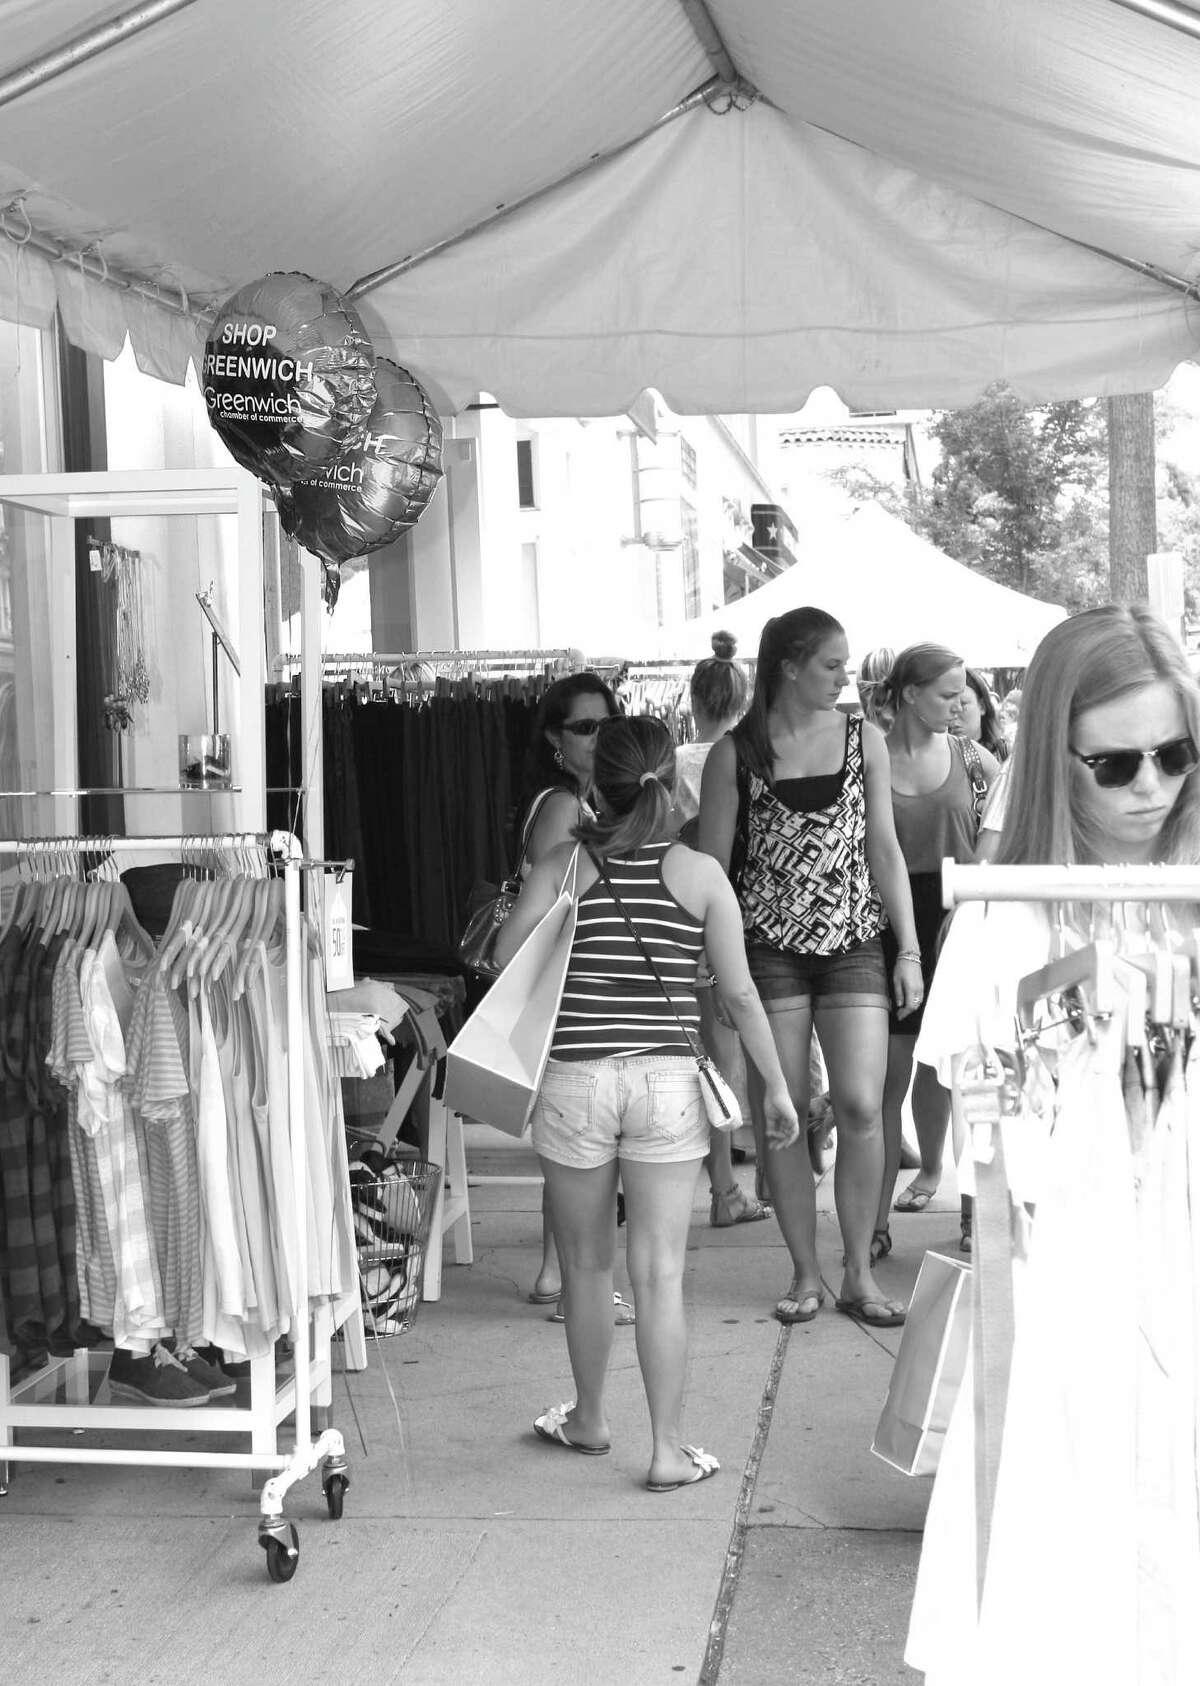 The popular Greenwich Sidewalk Sale Days will take place from July 12 to 15.